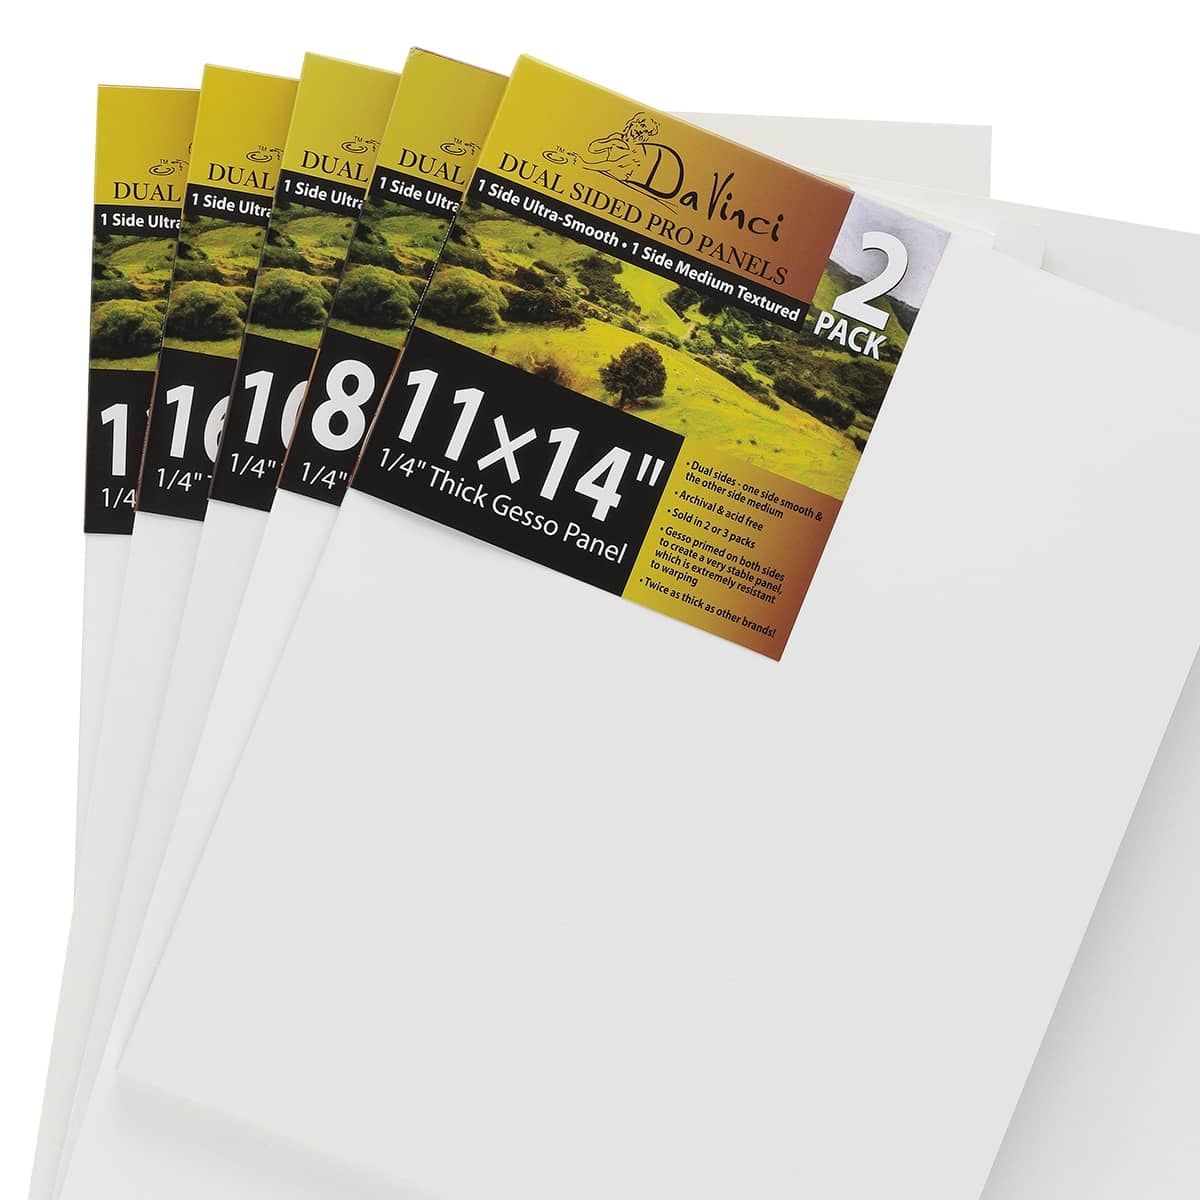 Professional Quality Dual Sided & Texture 1/4" Archival Panels